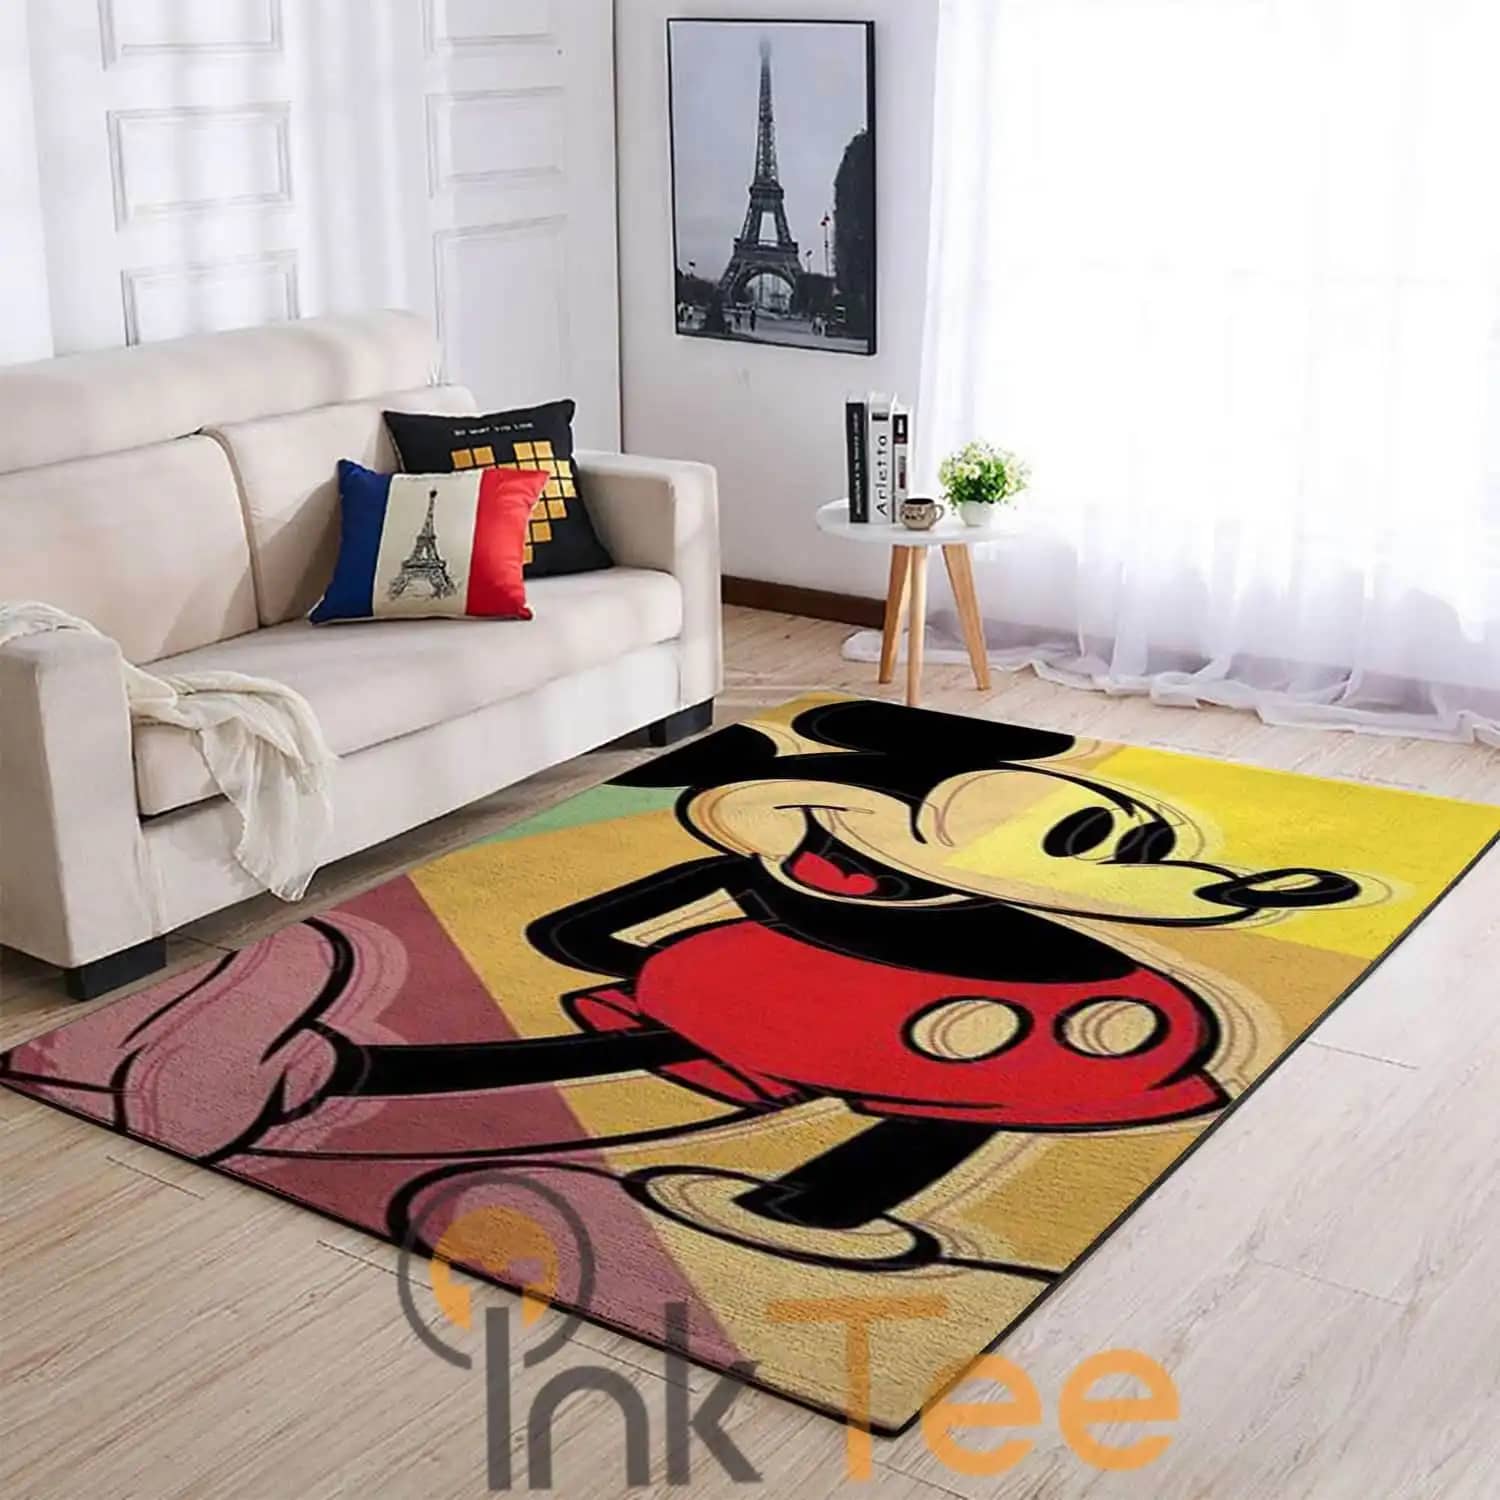 Colorful Mickey Mouse Living Room Area Amazon Best Seller Sku 4076 Rug